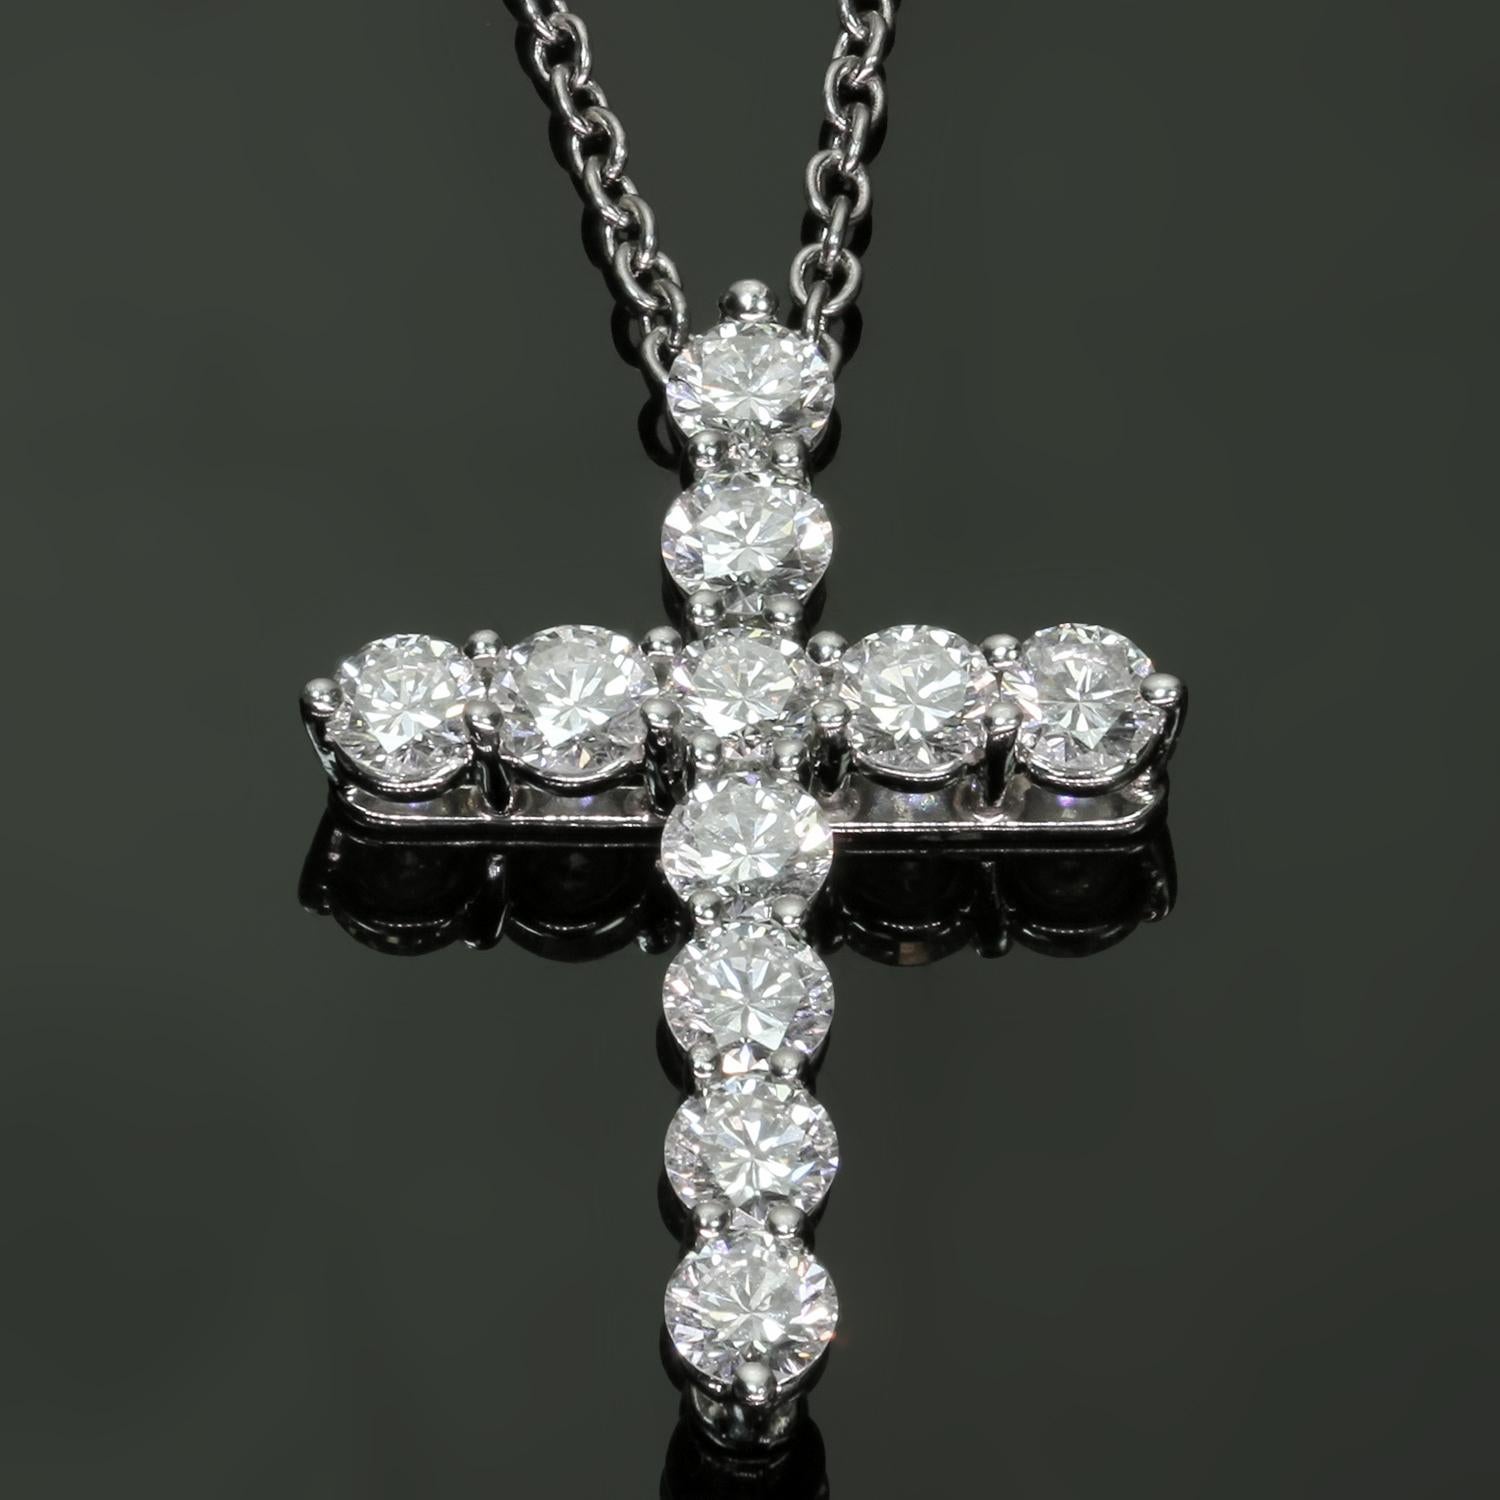 This exquisite authentic Tiffany & Co. necklace features a cross pendant crafted in platinum and set with round brilliant F-G-H VVS1-VVS2 diamonds weighing an estimated 0.40 carats. Made in United States circa 2020s. Measurements: 16.75